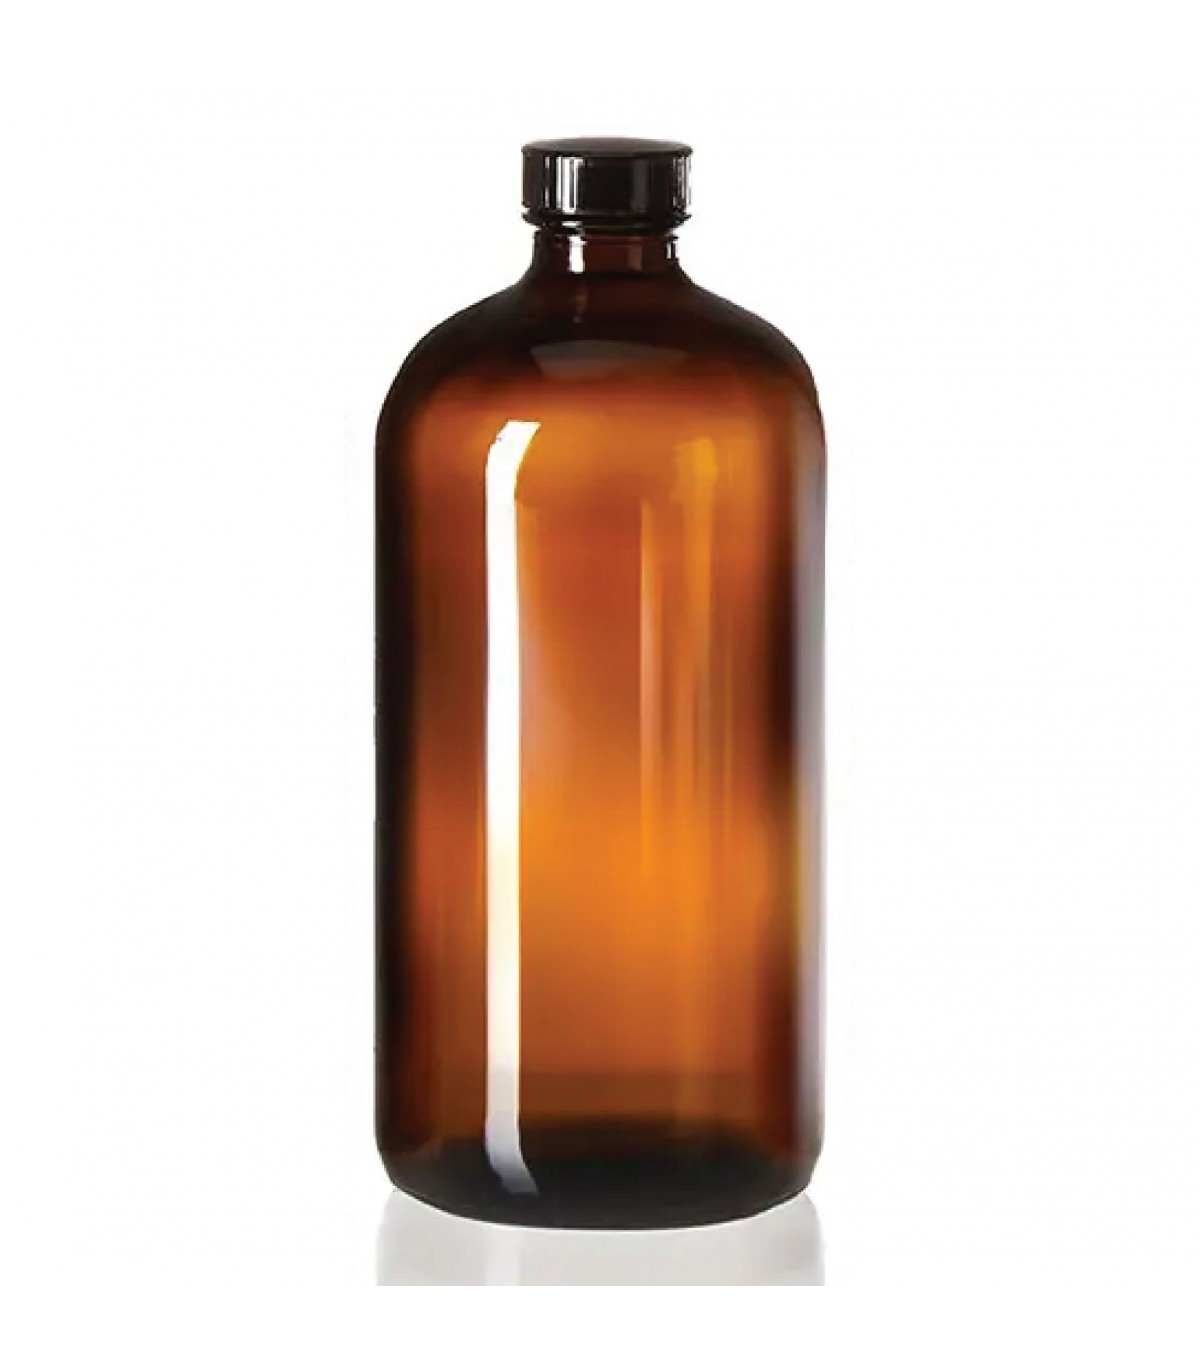 Buy 1 Litre Round Amber Glass Bottle With Cap & Stopper, Econo Green, One-stop shop for all your laboratory needs